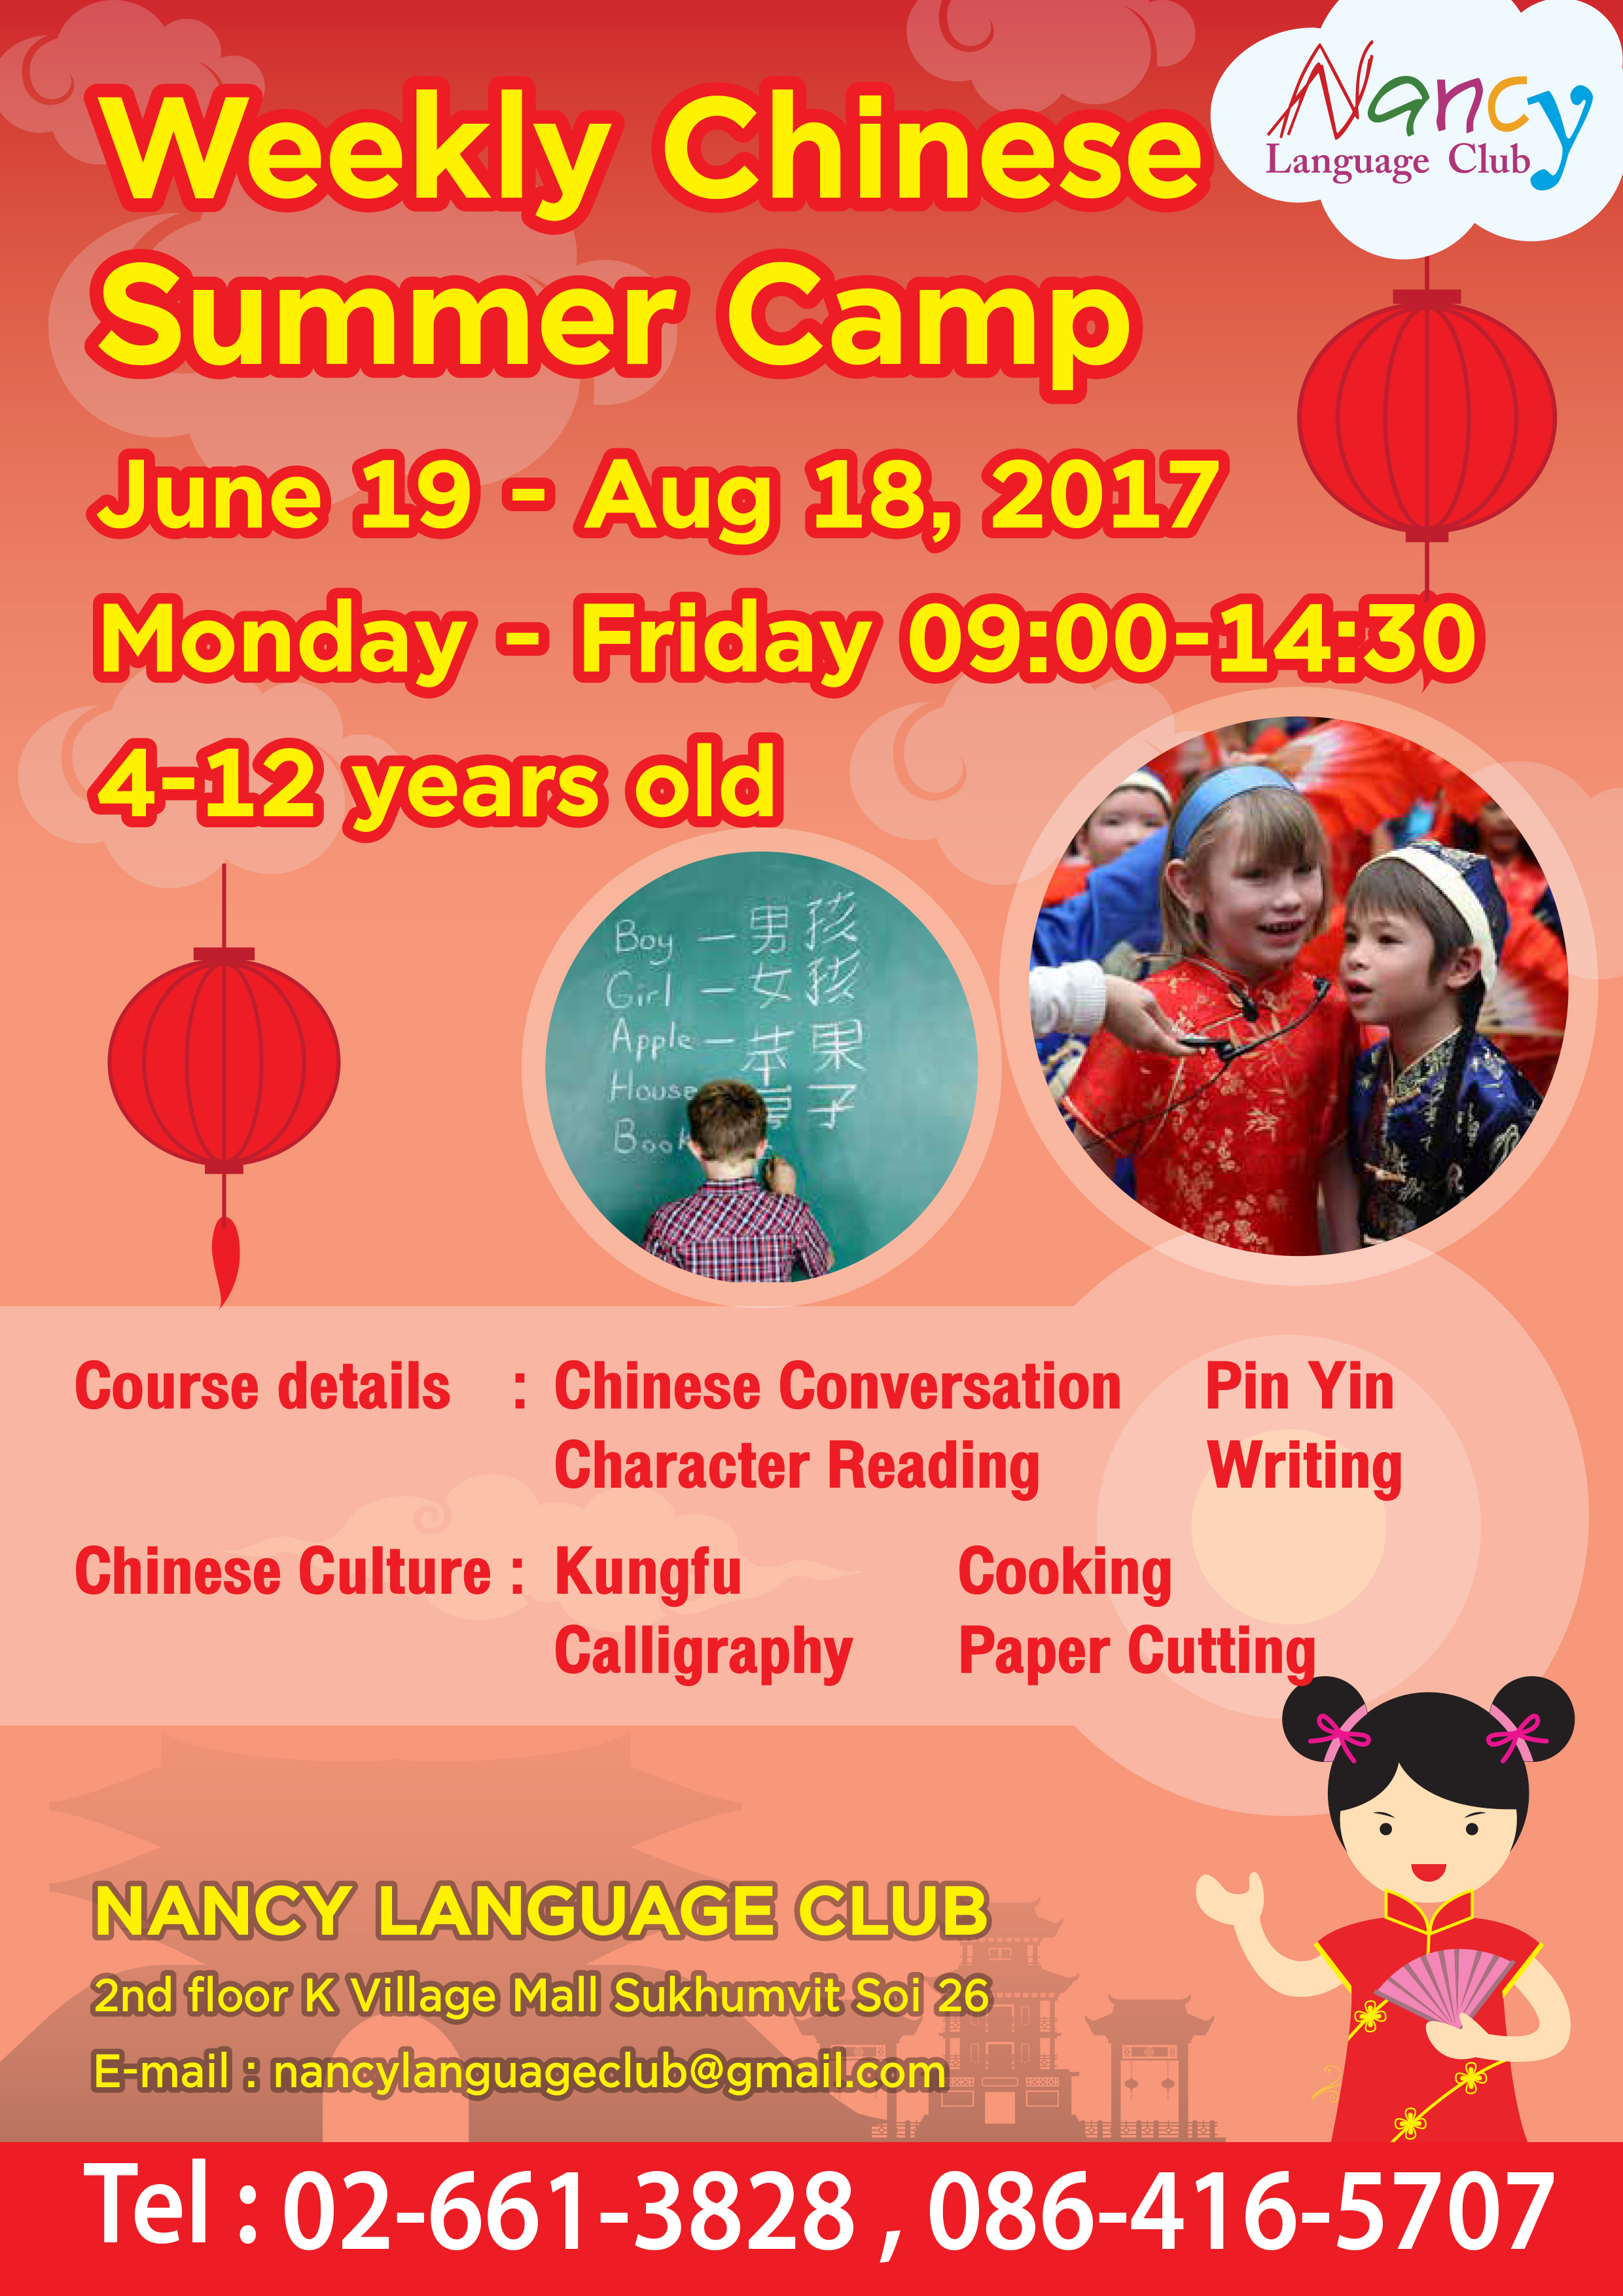 Weekly Chinese Summer Camp Nancy Language Club Promoting a Life